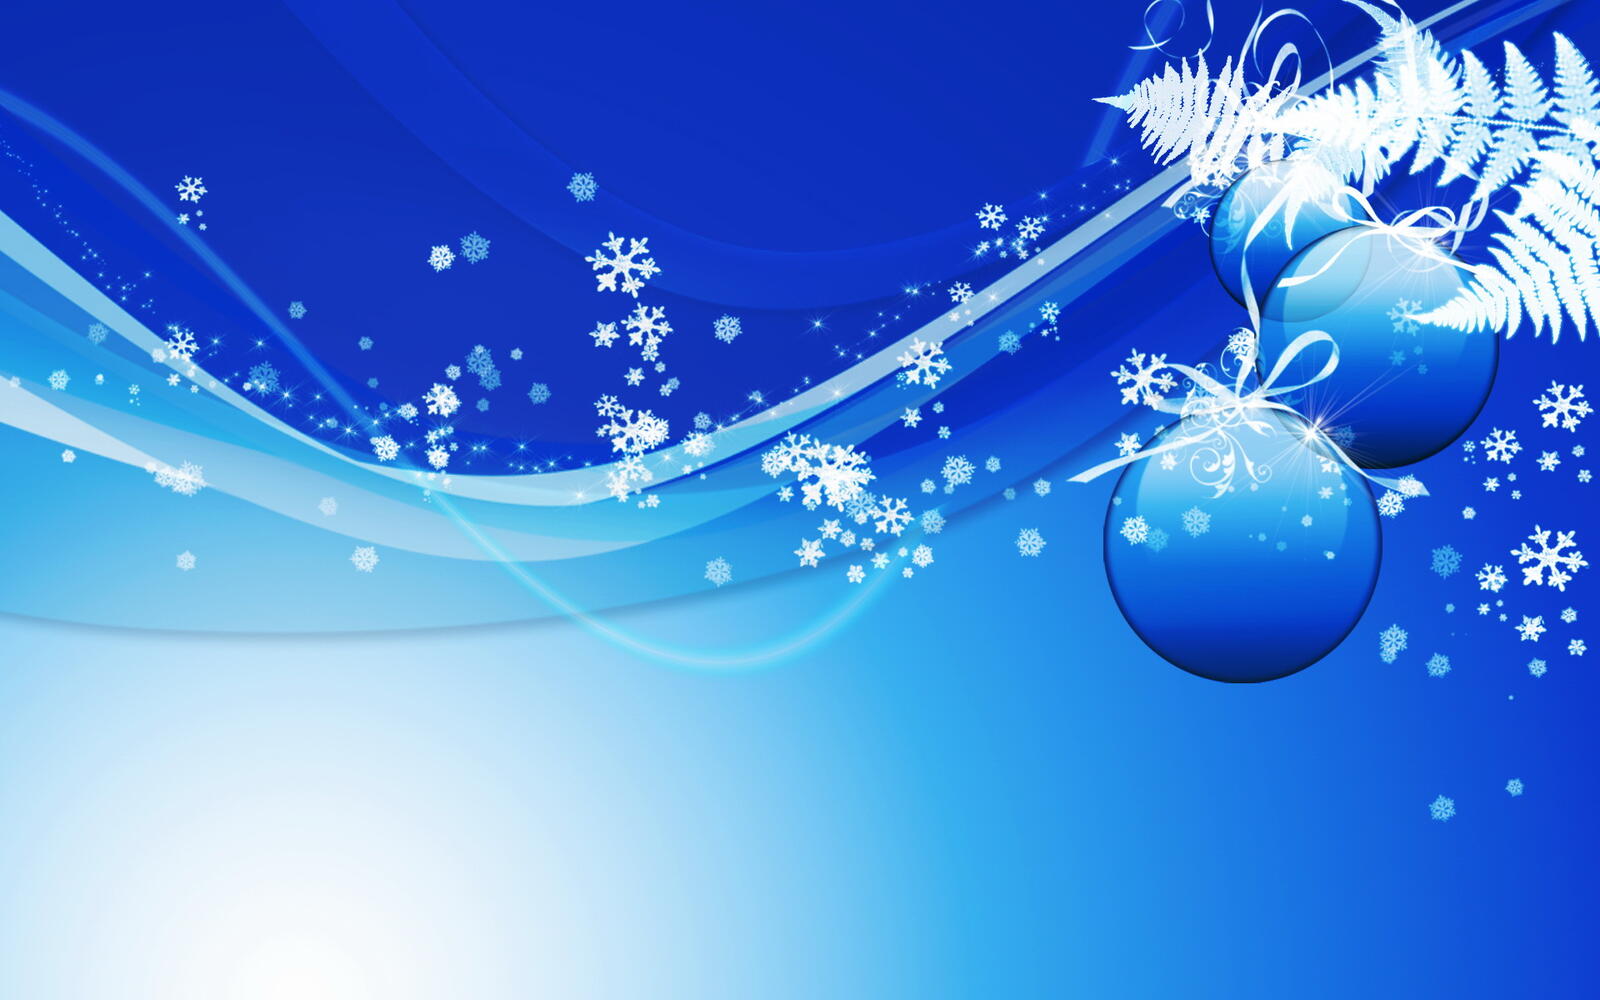 Wallpapers snowflakes background screensaver on the desktop